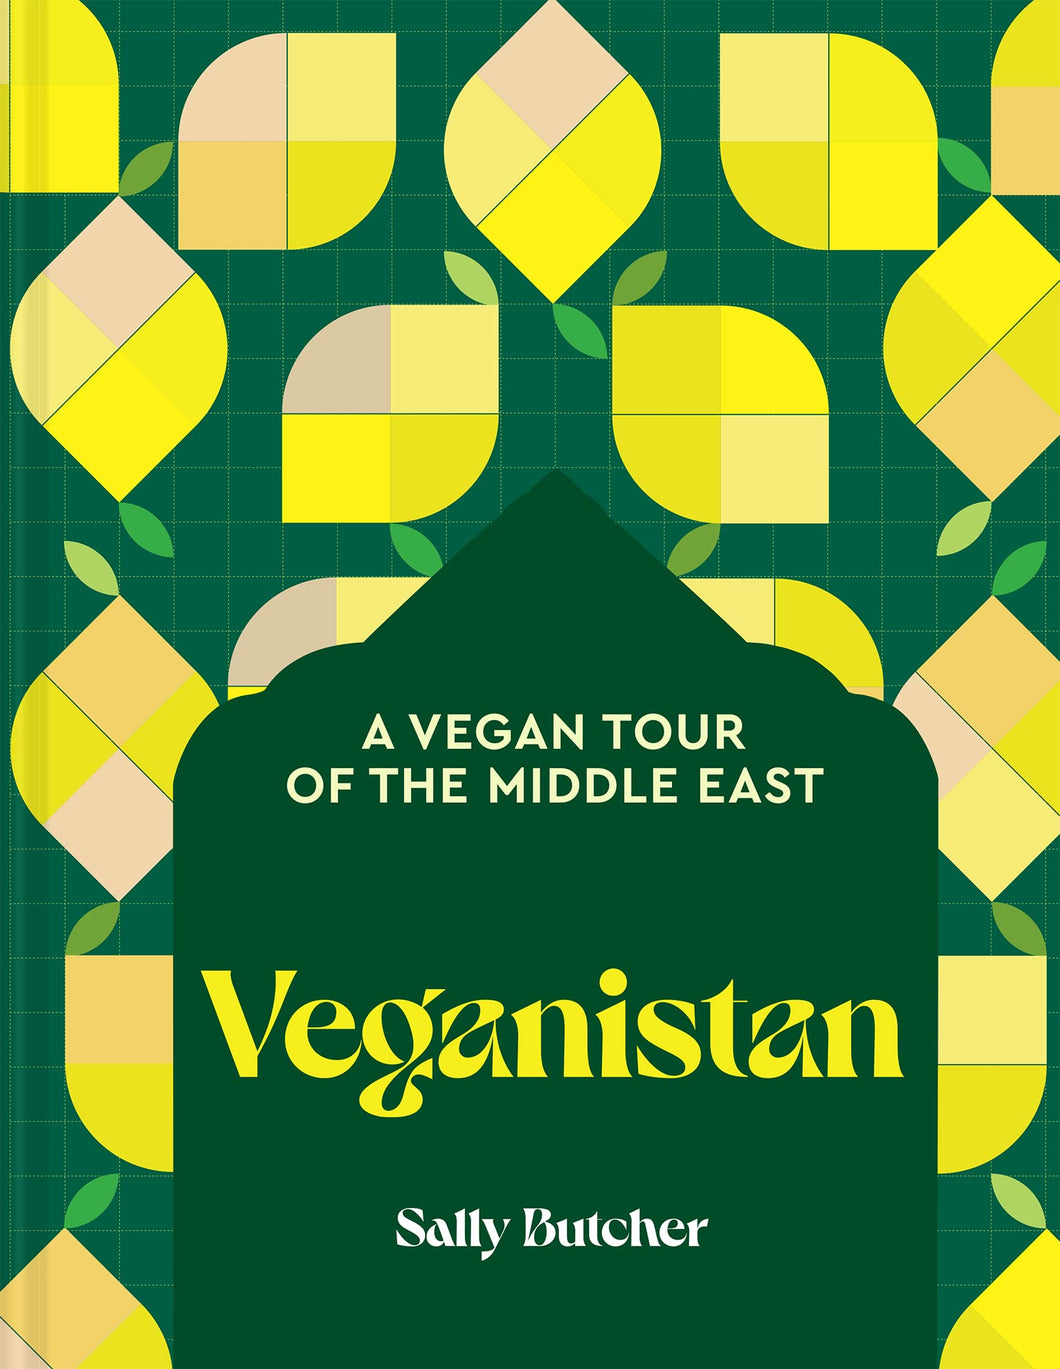 Veganistan: A Vegan Tour of the Middle East